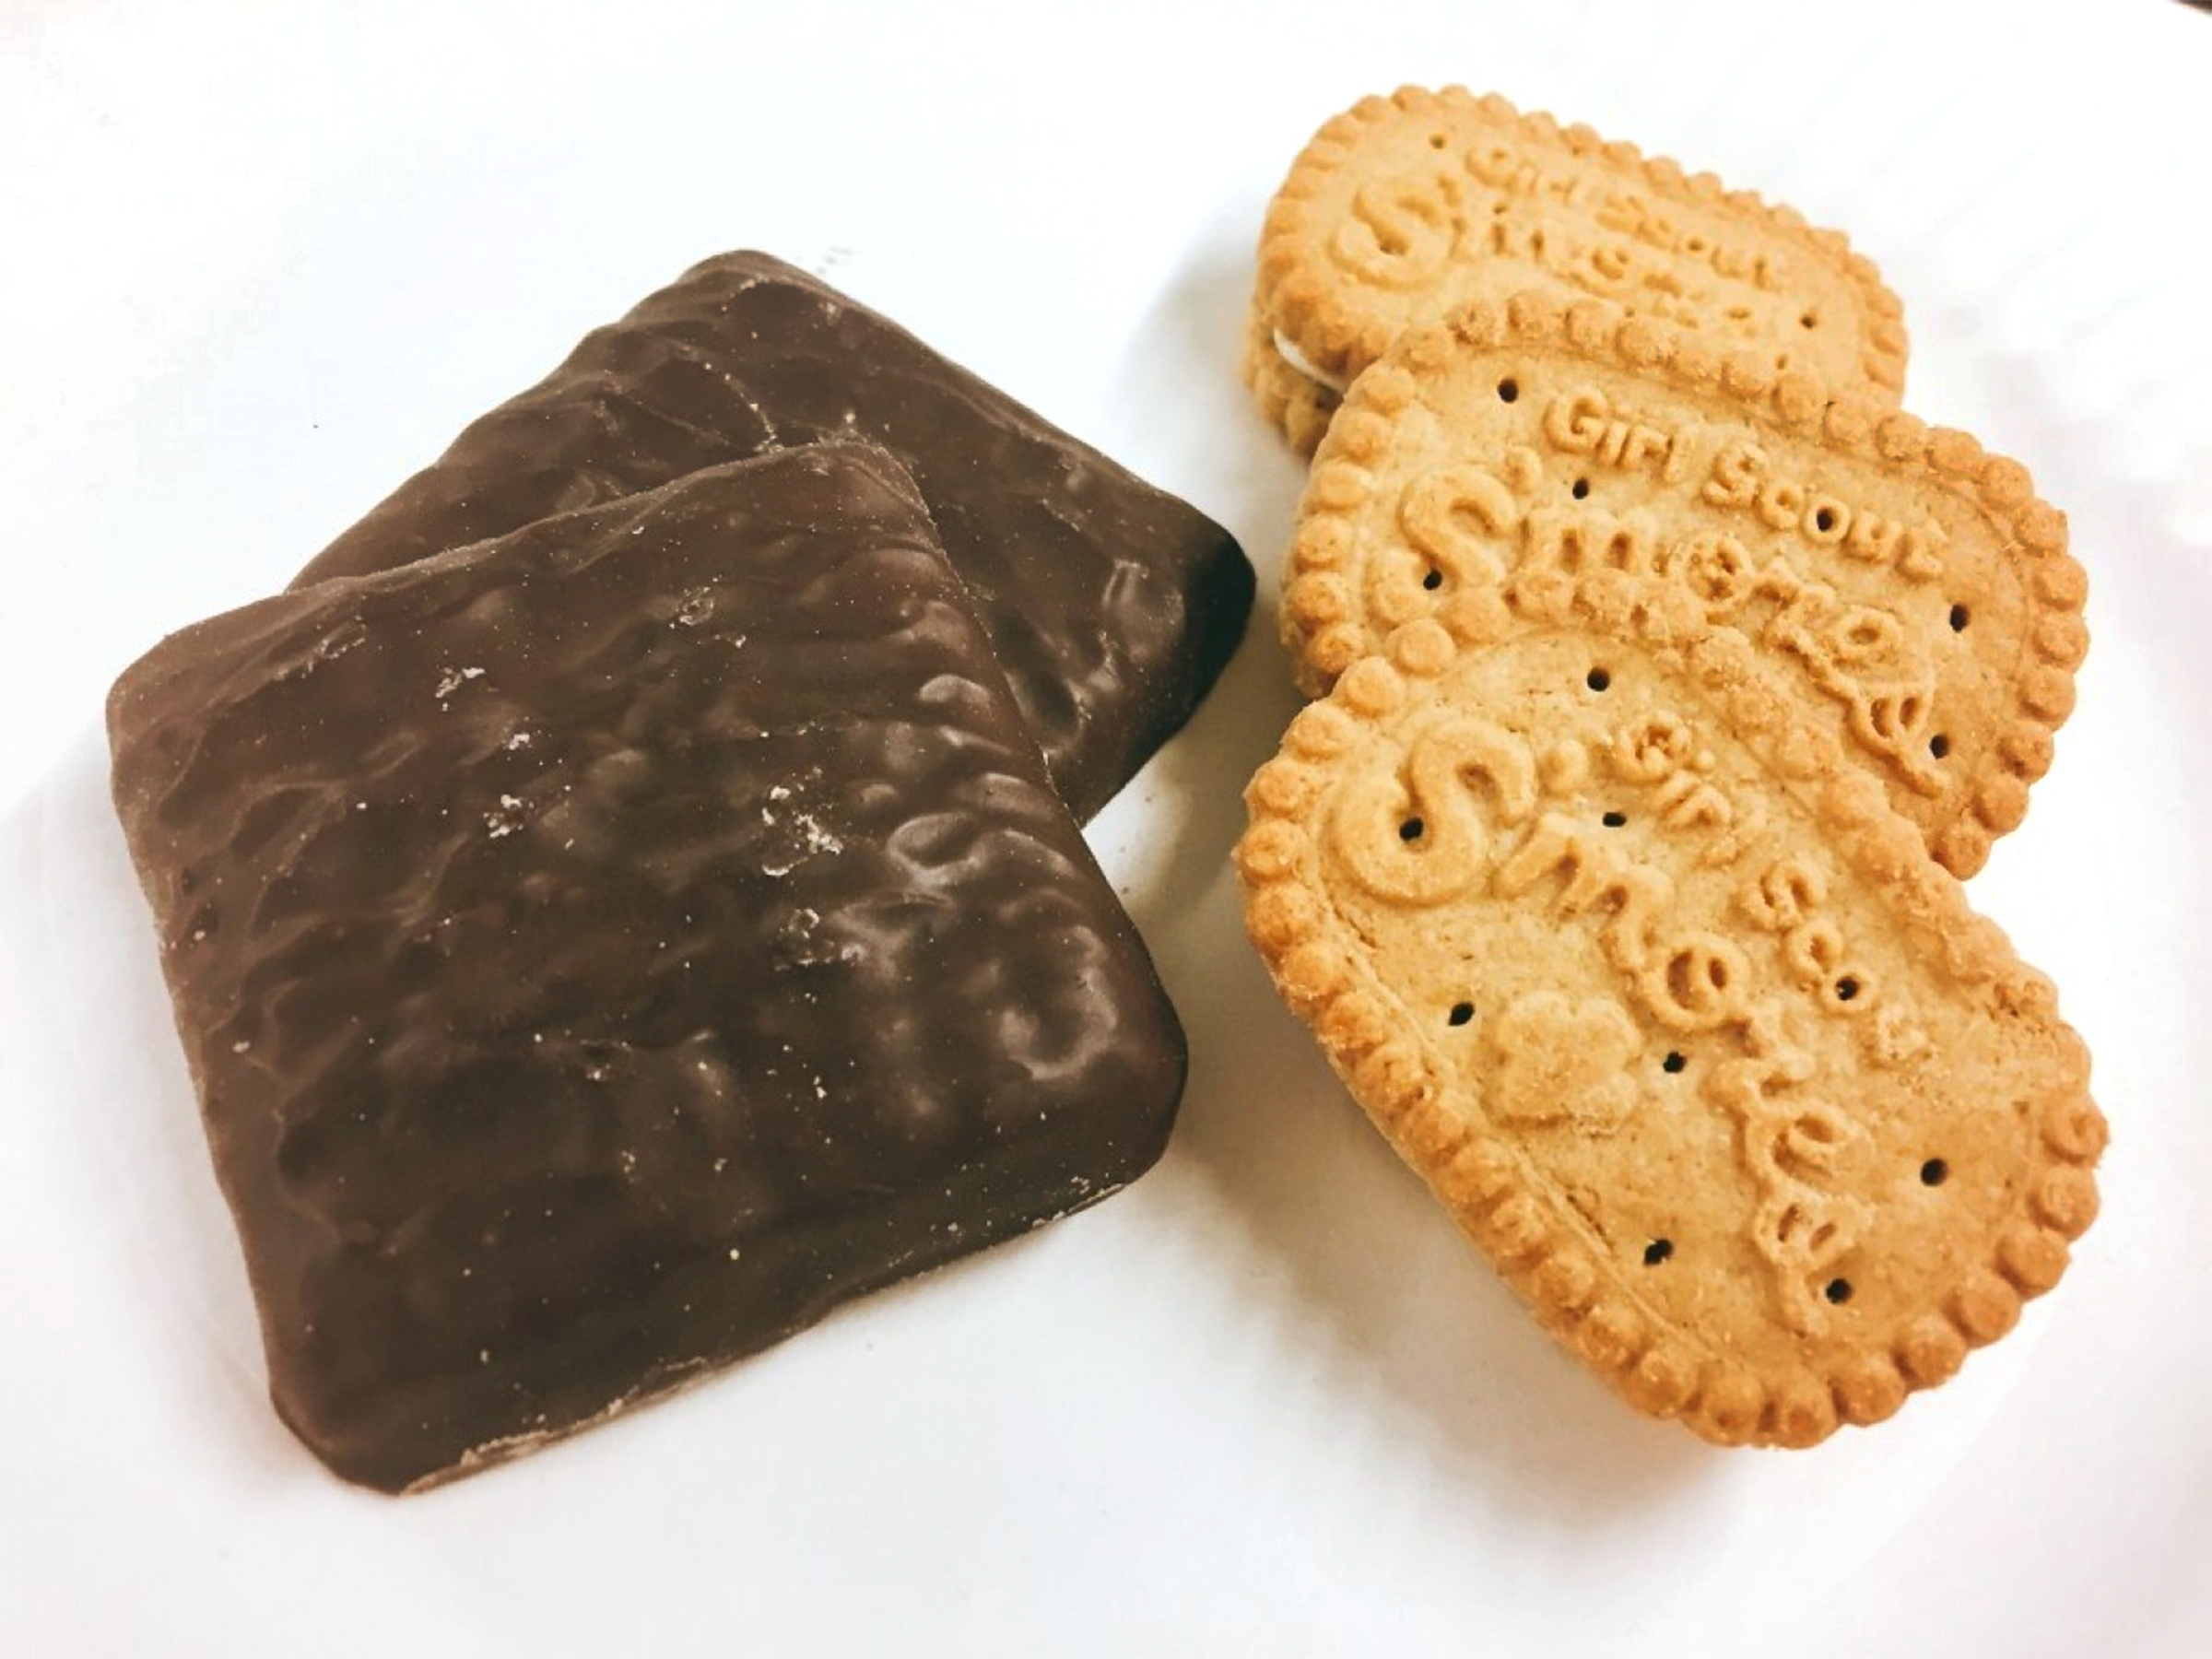 The new Smores Girl Scout cookies from the Girl Scouts two bakeries. (The Washington Post&mdash;Getty Images)